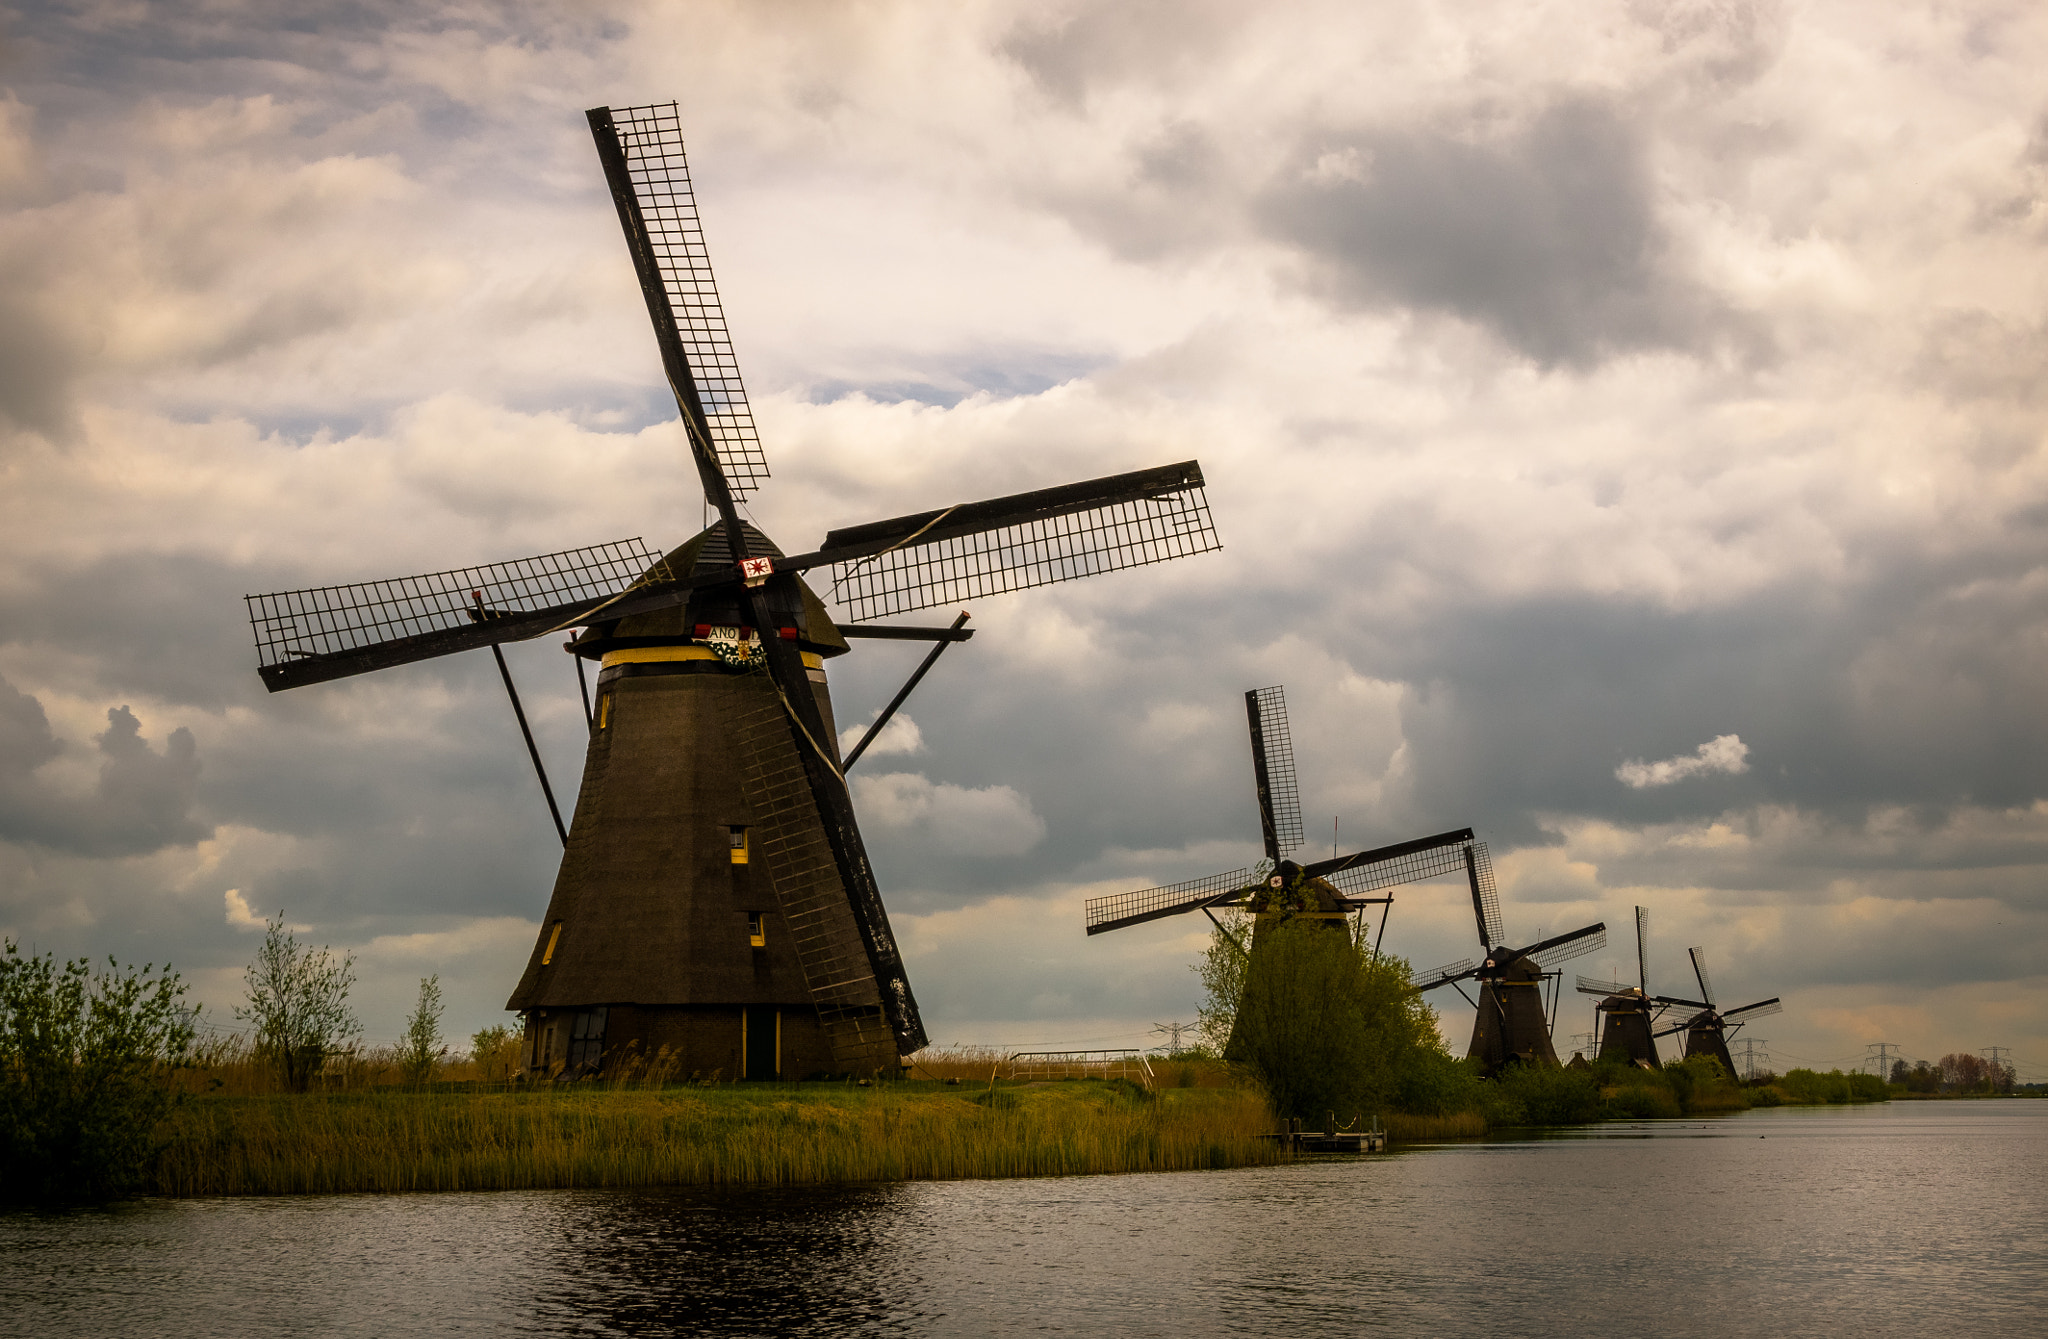 Nikon D7000 + Sigma 24-105mm F4 DG OS HSM Art sample photo. Windmills and clouds photography